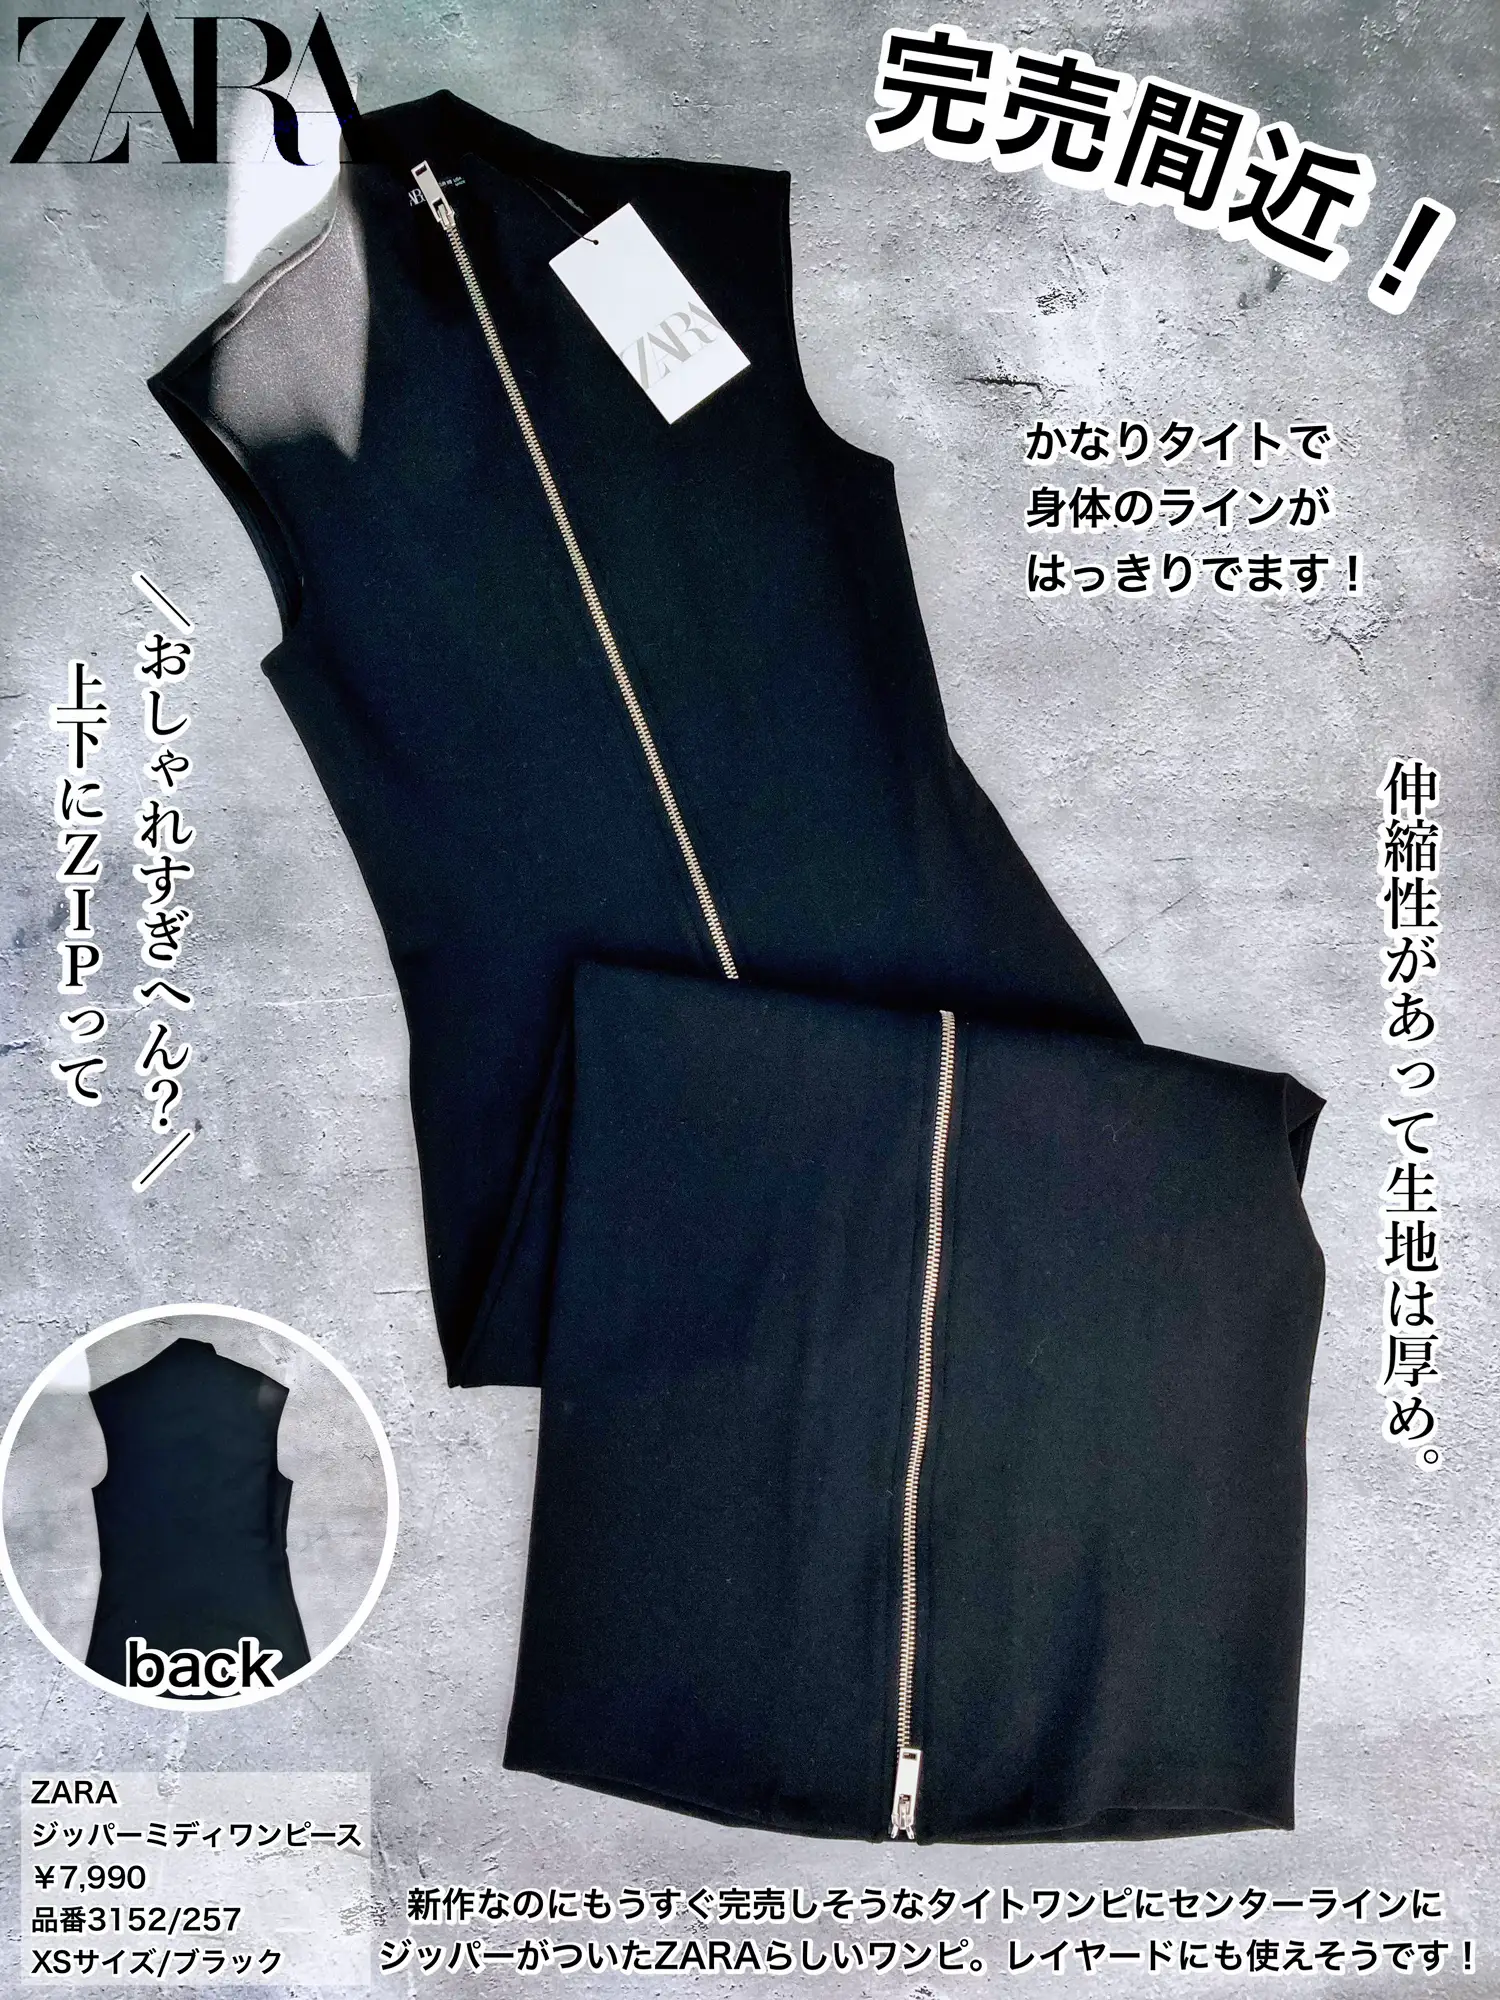 ZARA 】 I'm sorry if it's sold out 🙏 The new black dress is too